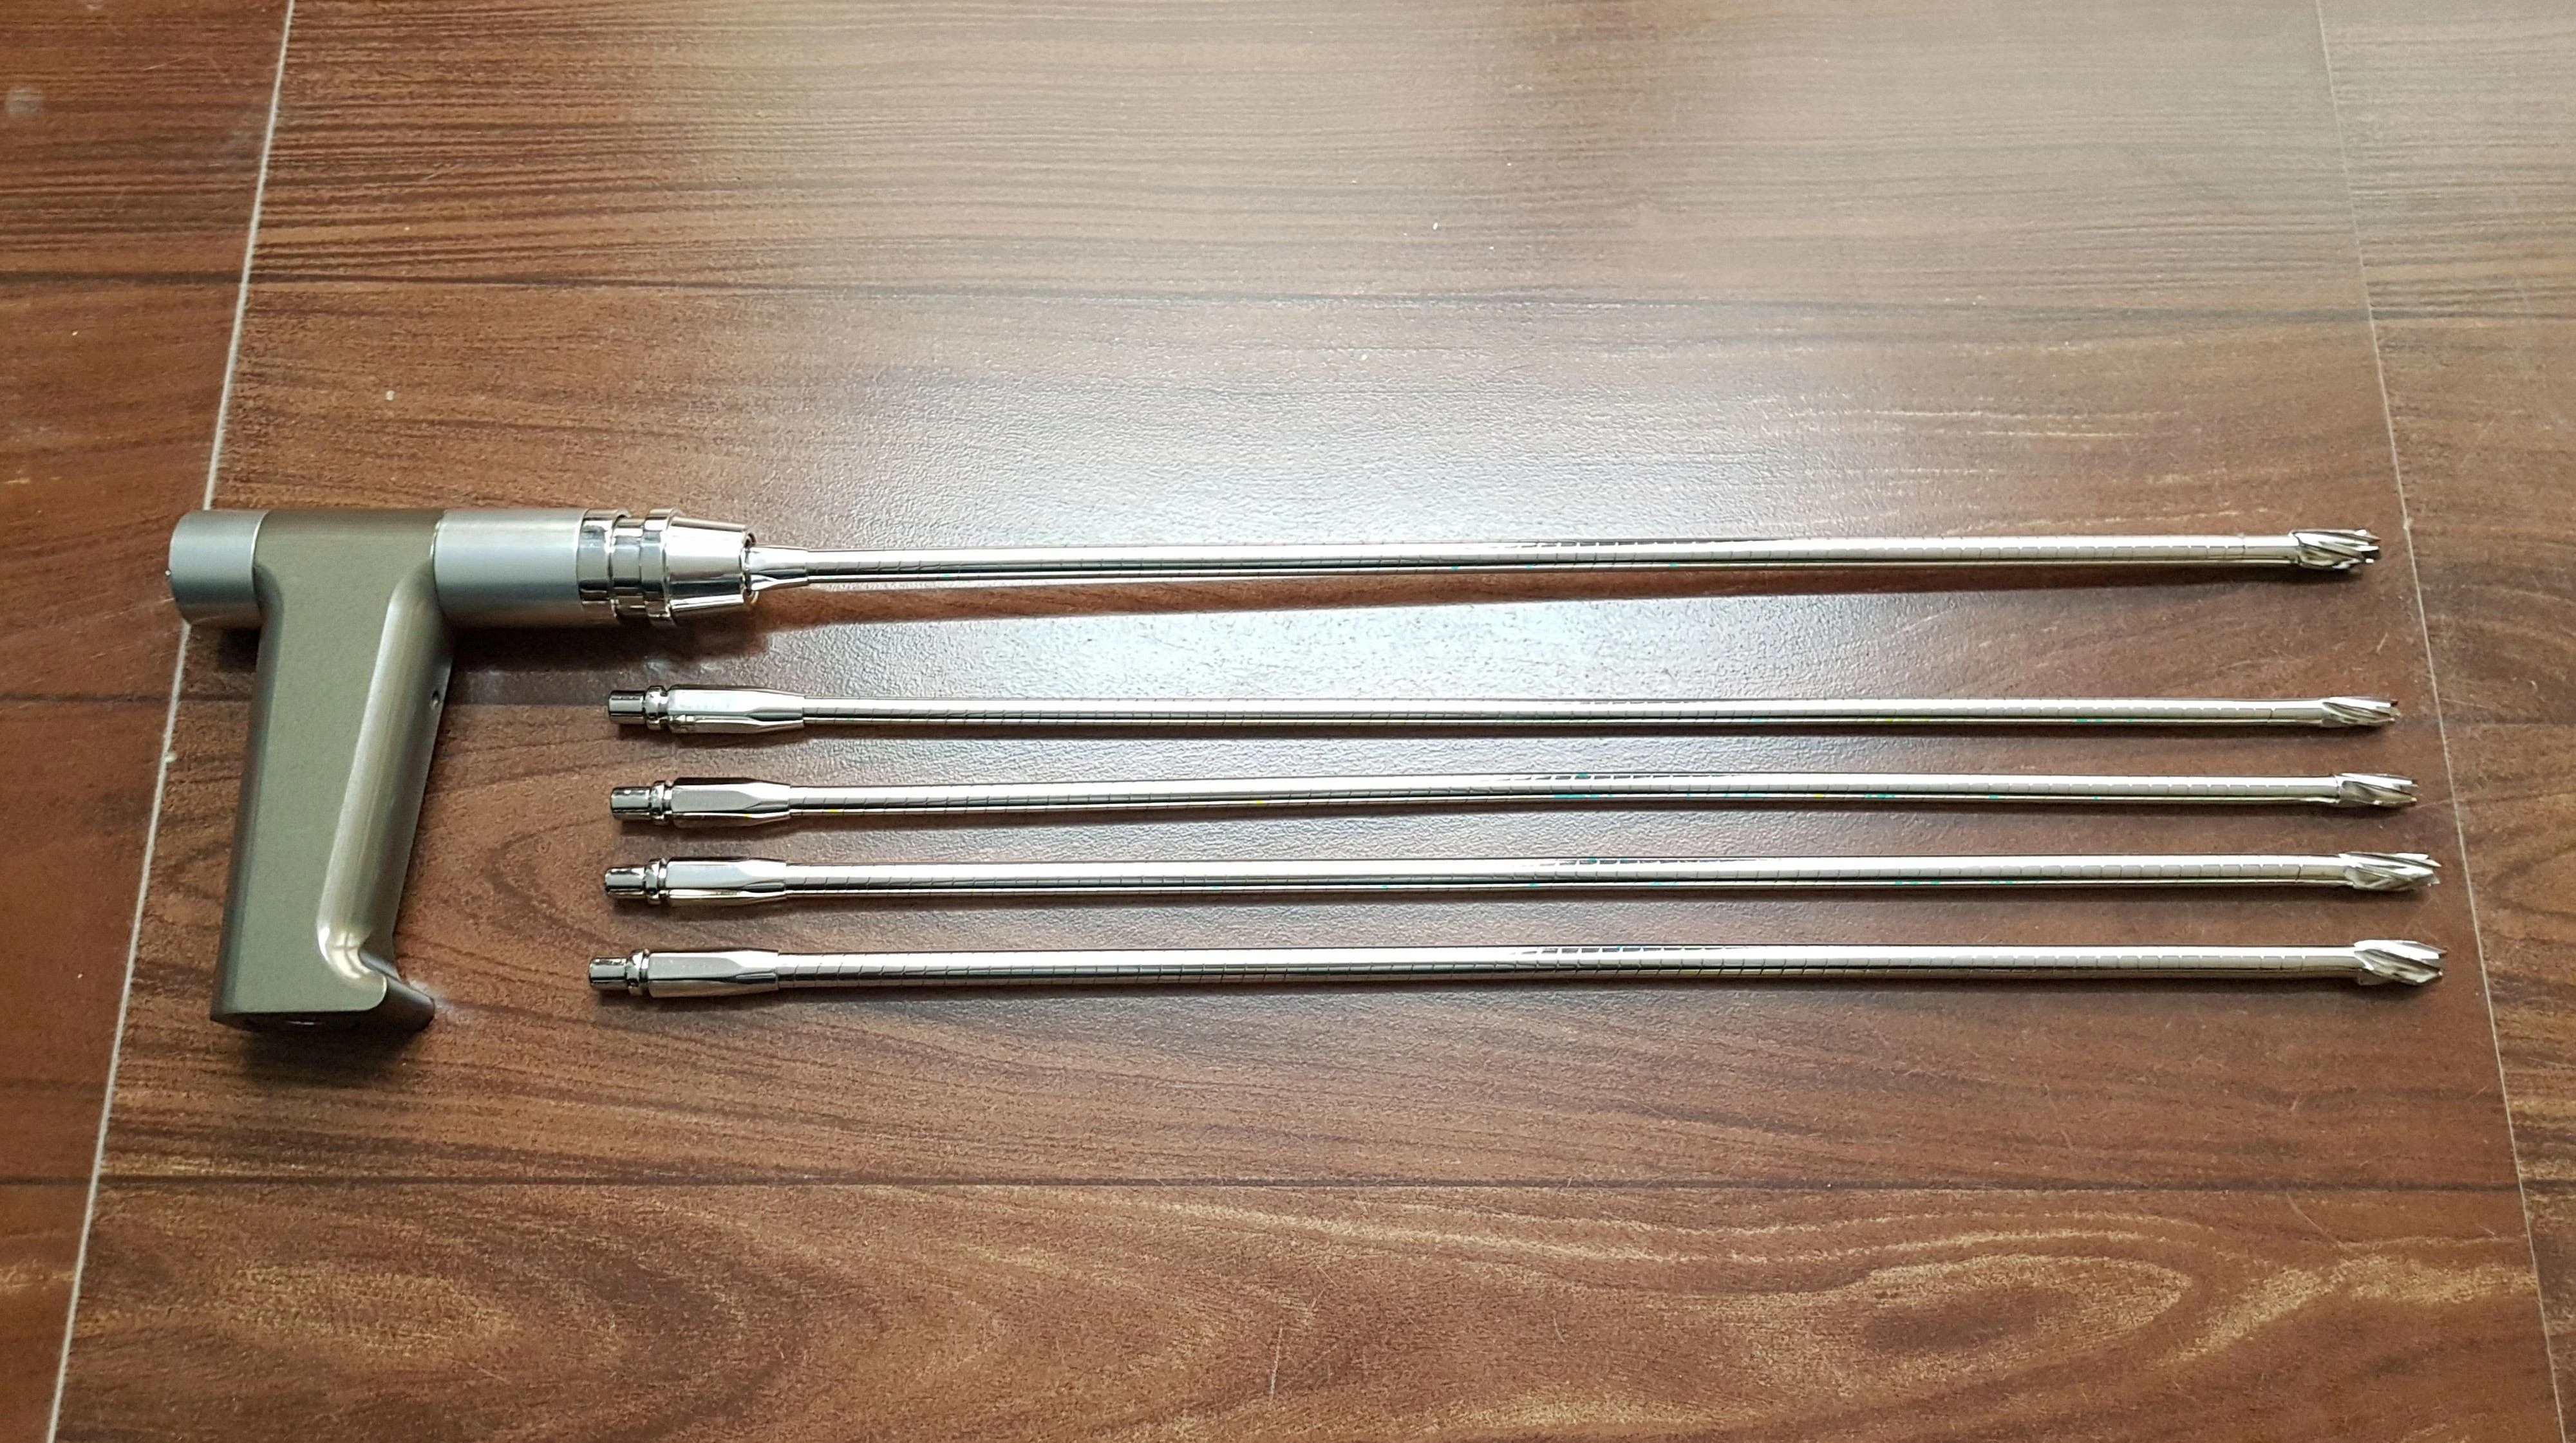 Bone Drills - Manual and Electric, Bone Drills - Manual and Electric  Manufacturer, Bone Drills - Manual and Electric Suppliers, Orthopedic  Implants, India